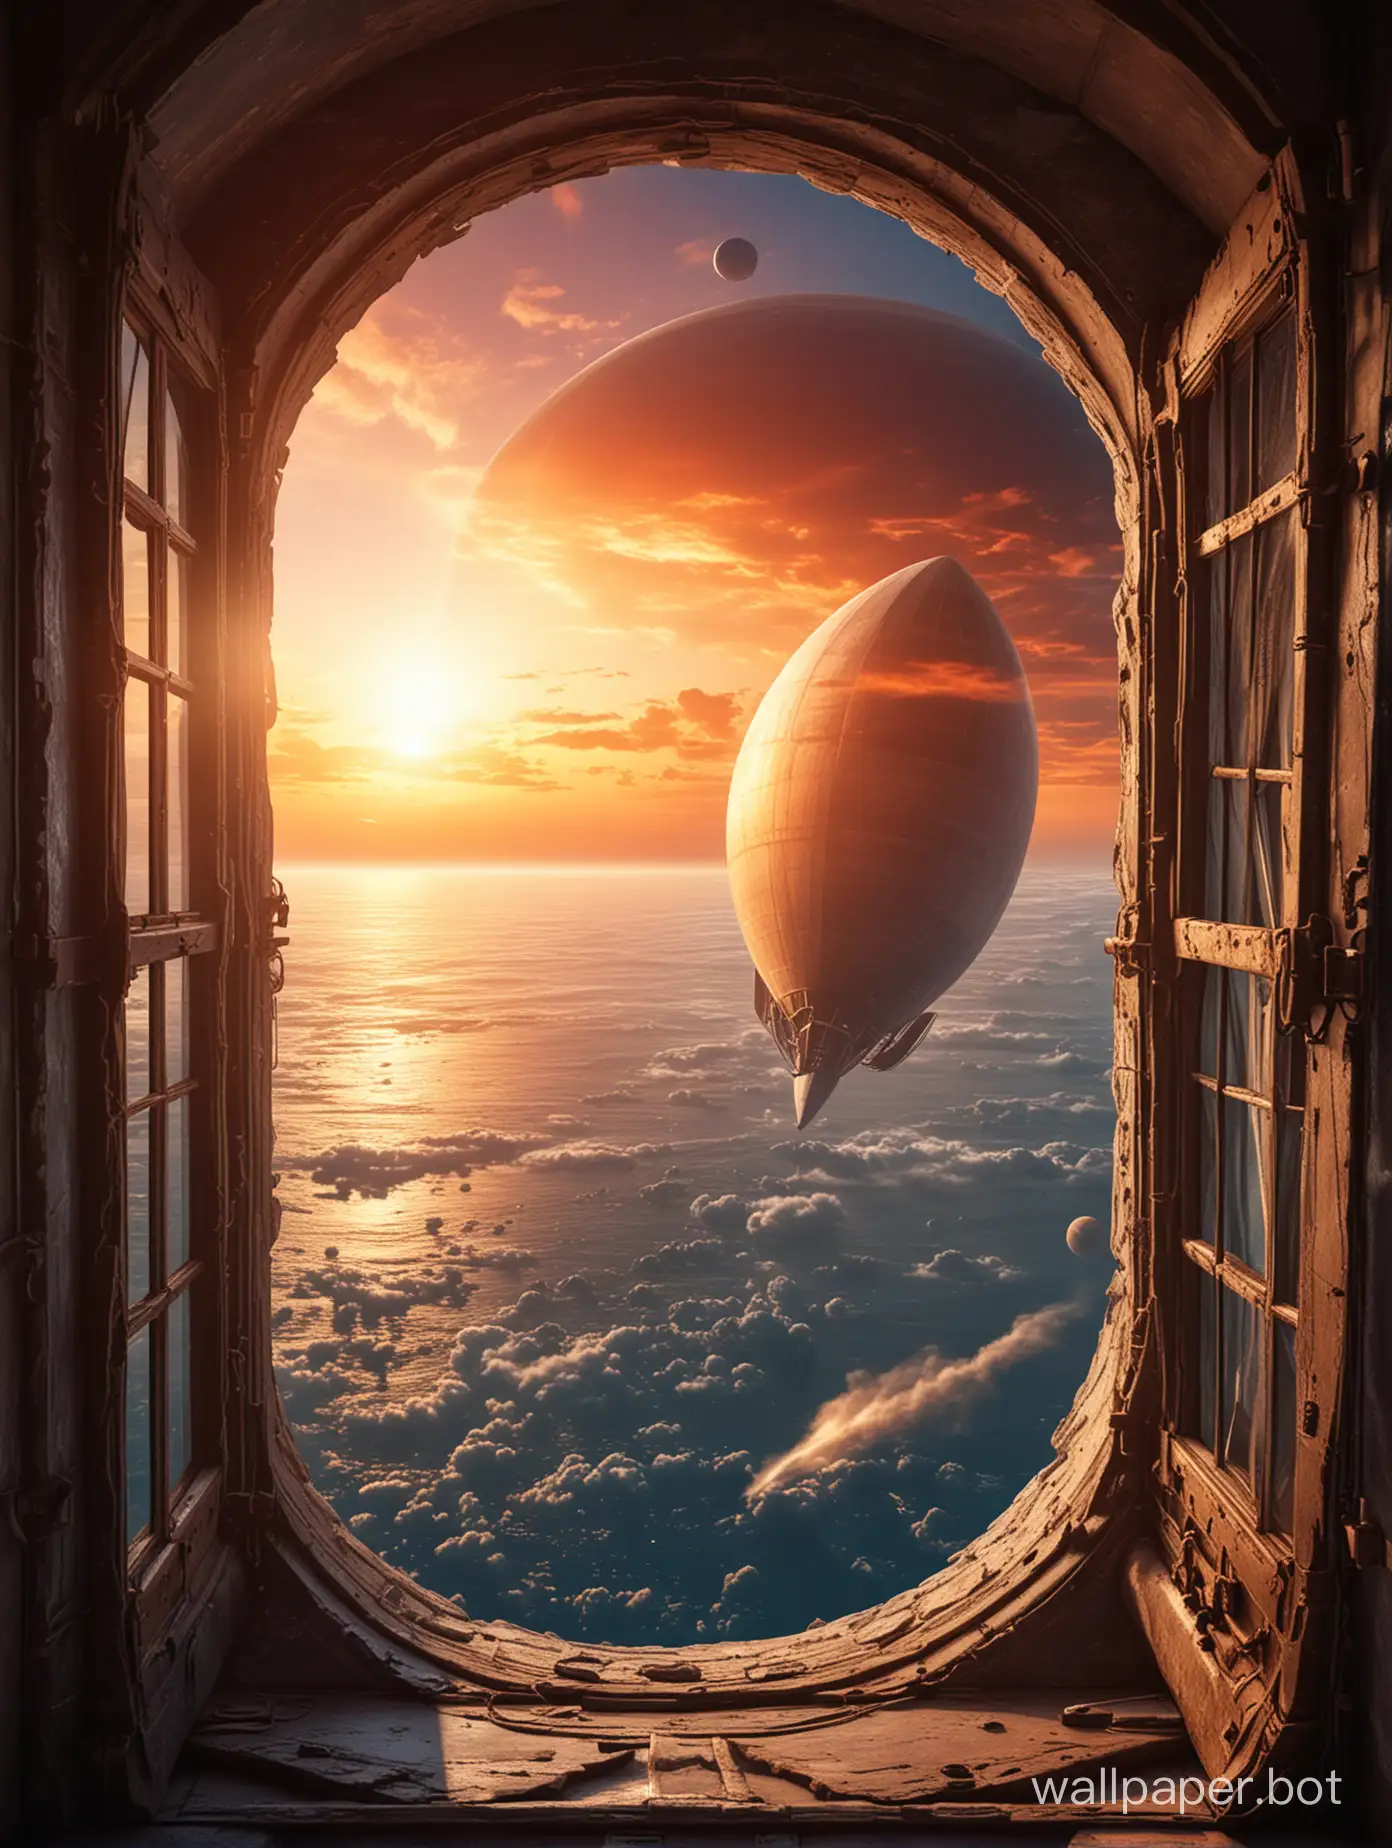 A narrow window into a fantastic space with a planet. fantastic tower against sunset background. There is an airship with sails in the sky. High resolution. Very definition.  sci-fi.